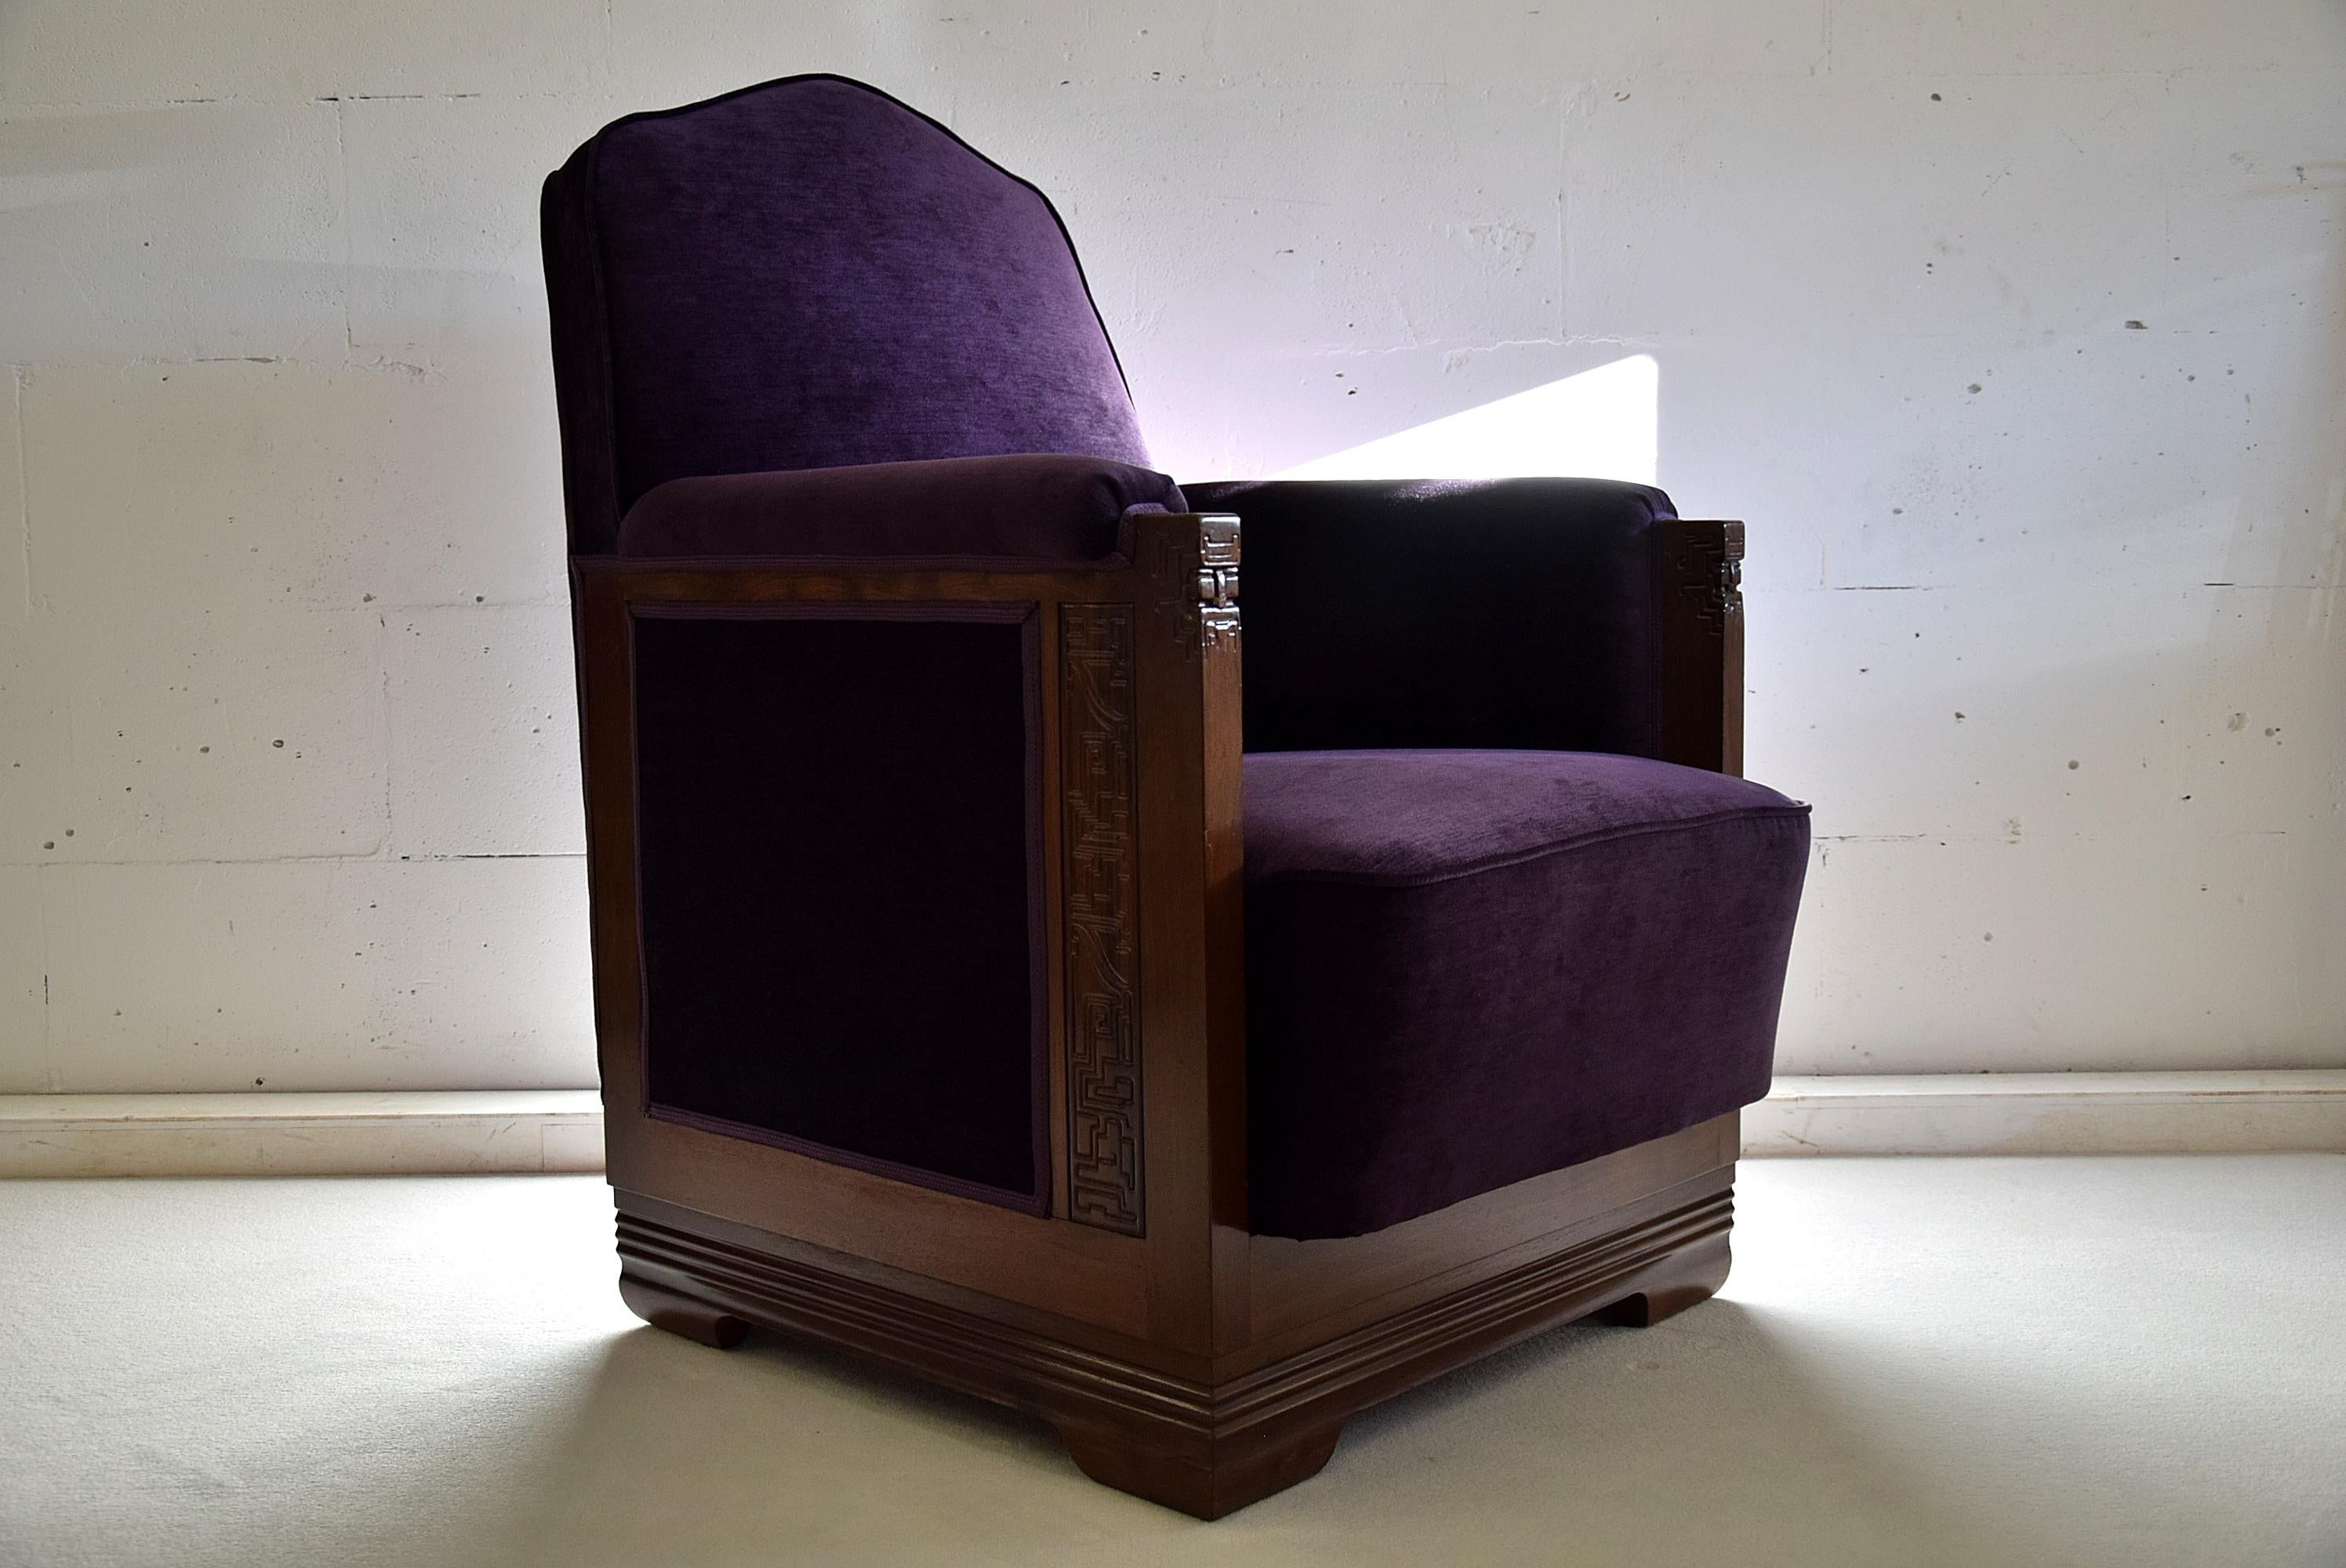 Looking for a unique and elegant addition to your home or office? Look no further than these stunning lounge chairs designed by C.A. Lion Cachet. Crafted with Jatoba frames and upholstered in sumptuous purple velvet, these chairs are the epitome of